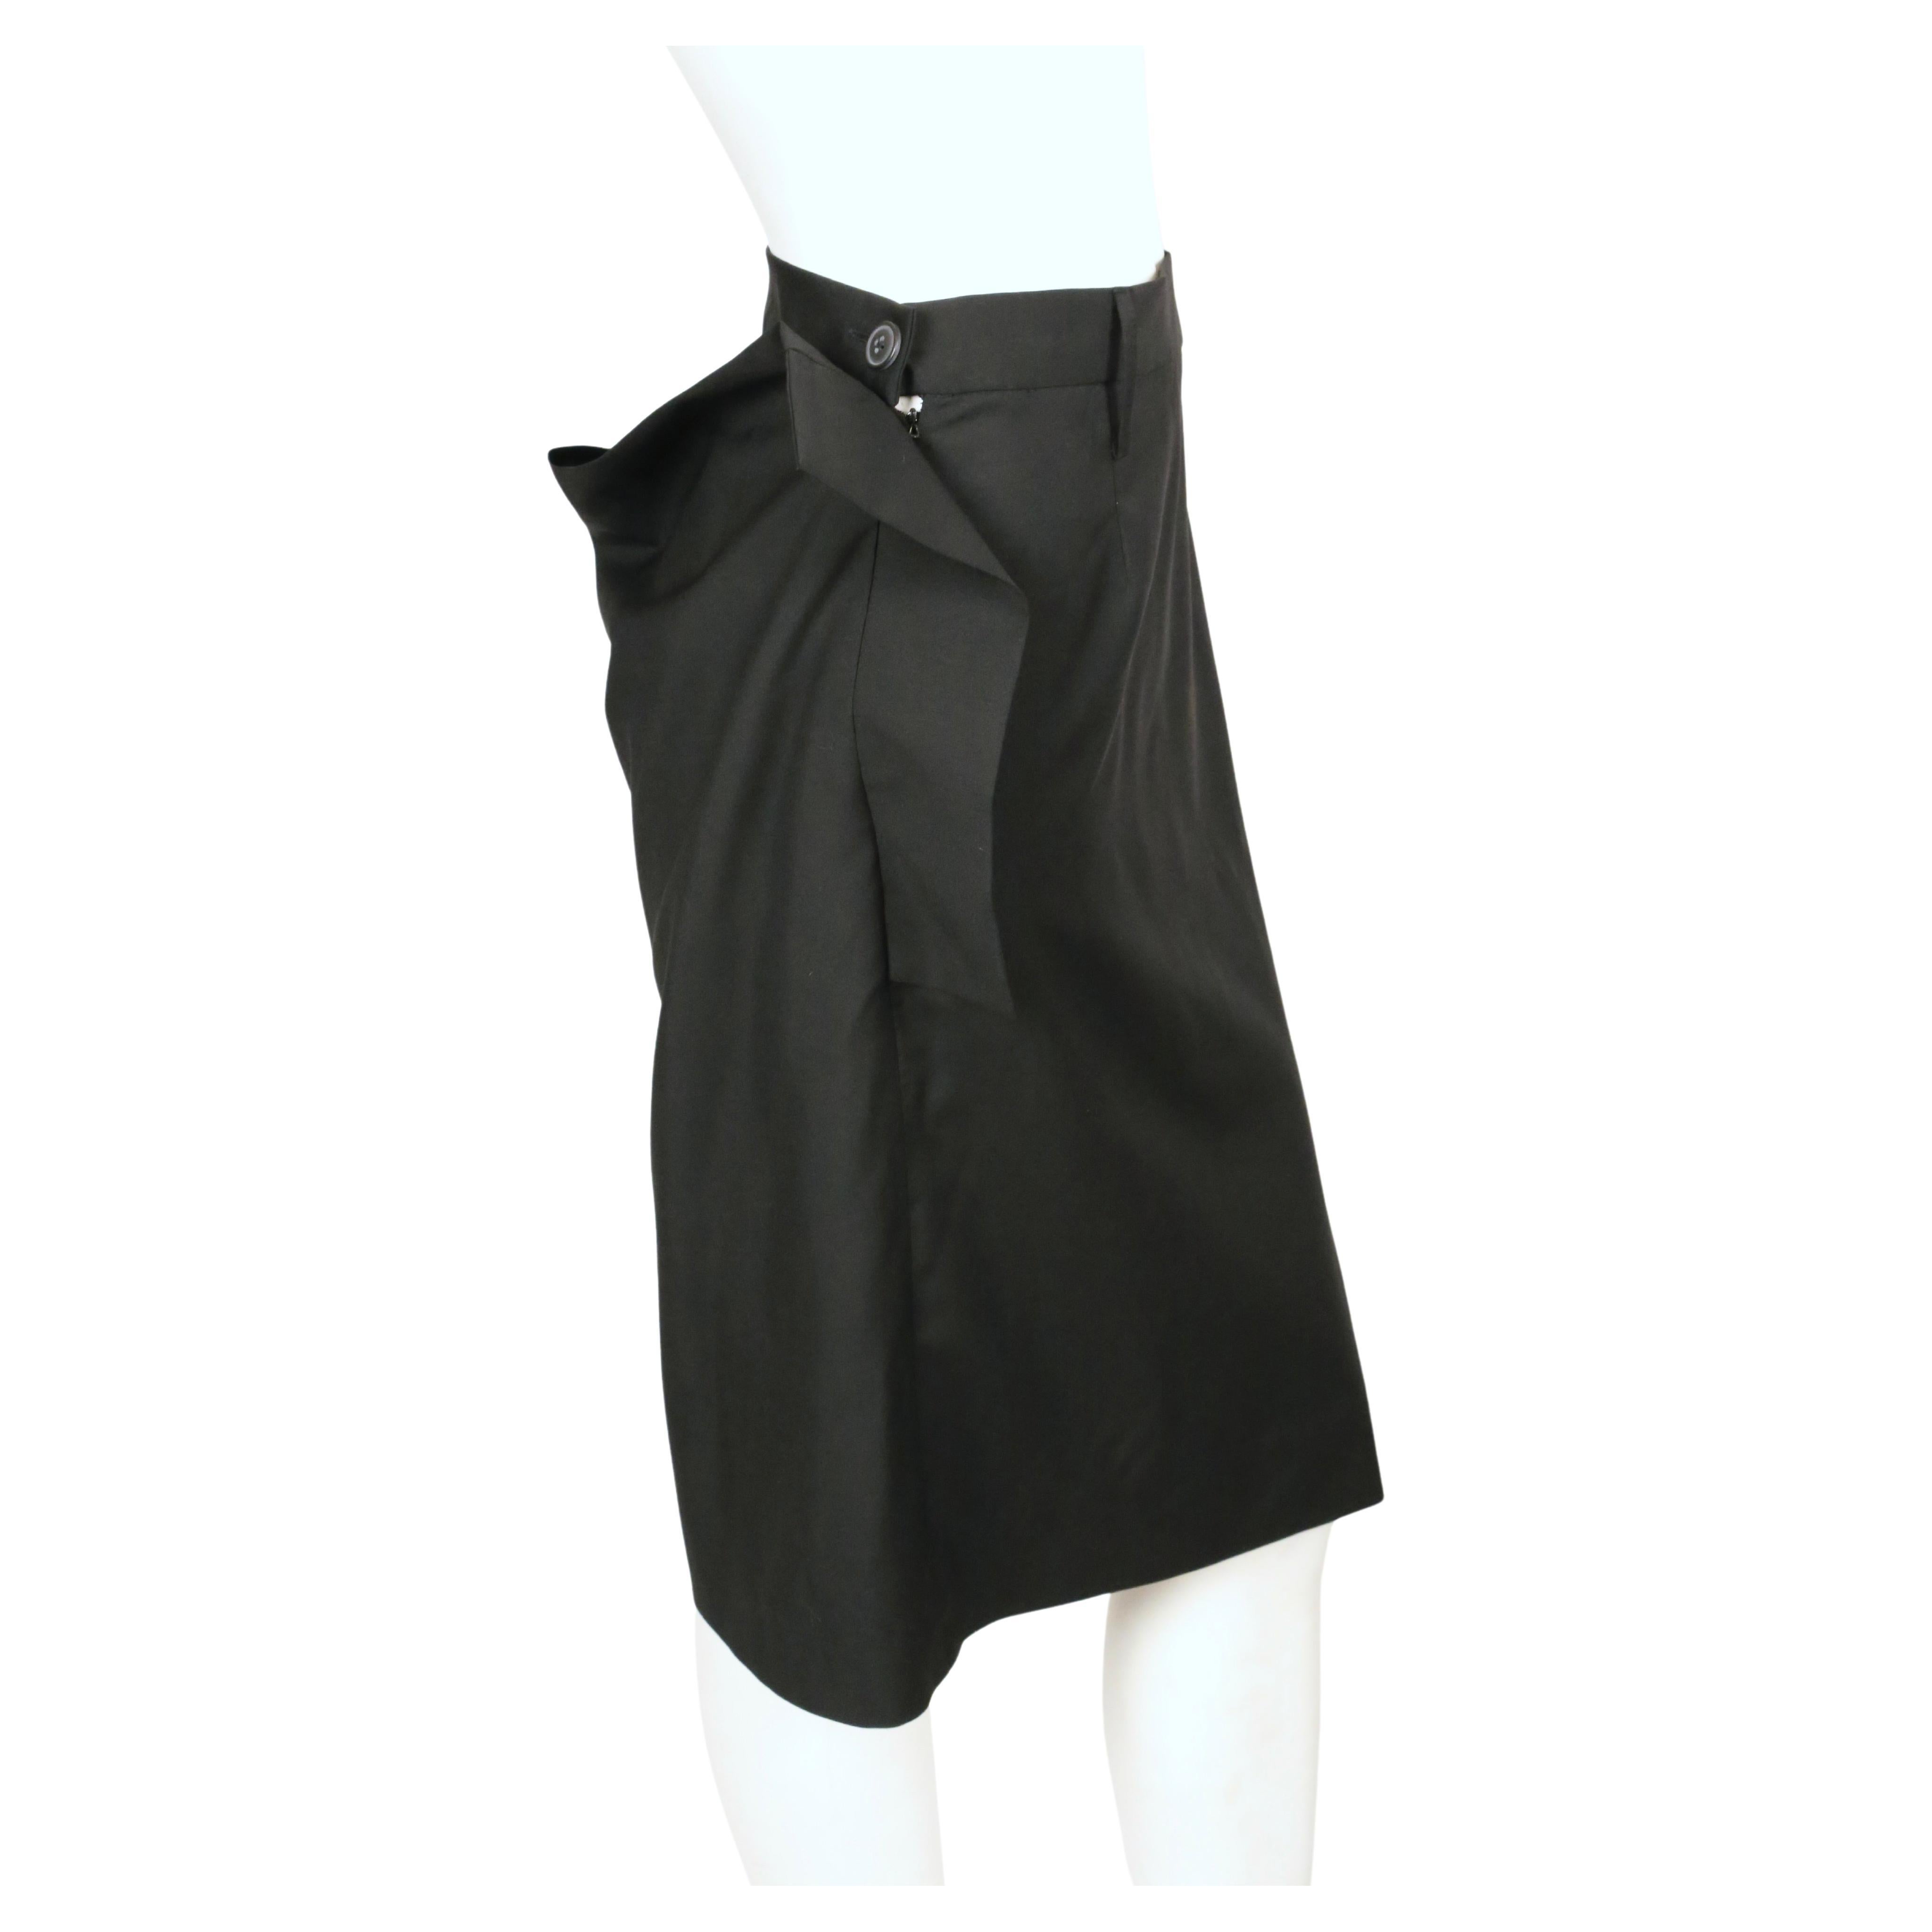 VIVIENNE WESTWOOD black draped top and skirt suit For Sale 4